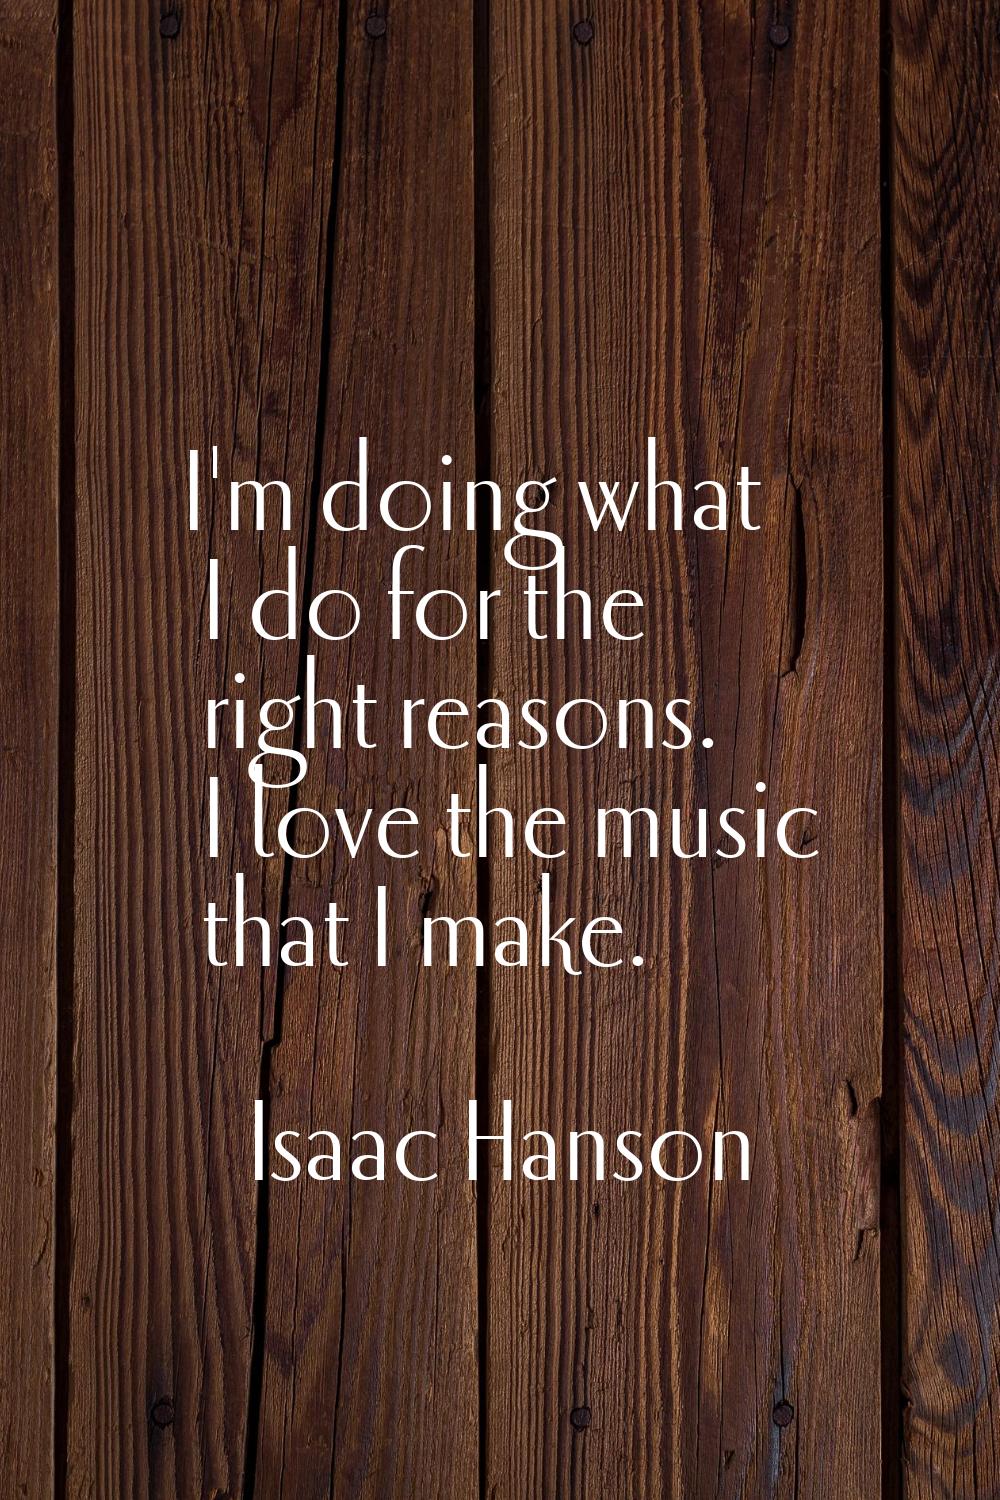 I'm doing what I do for the right reasons. I love the music that I make.